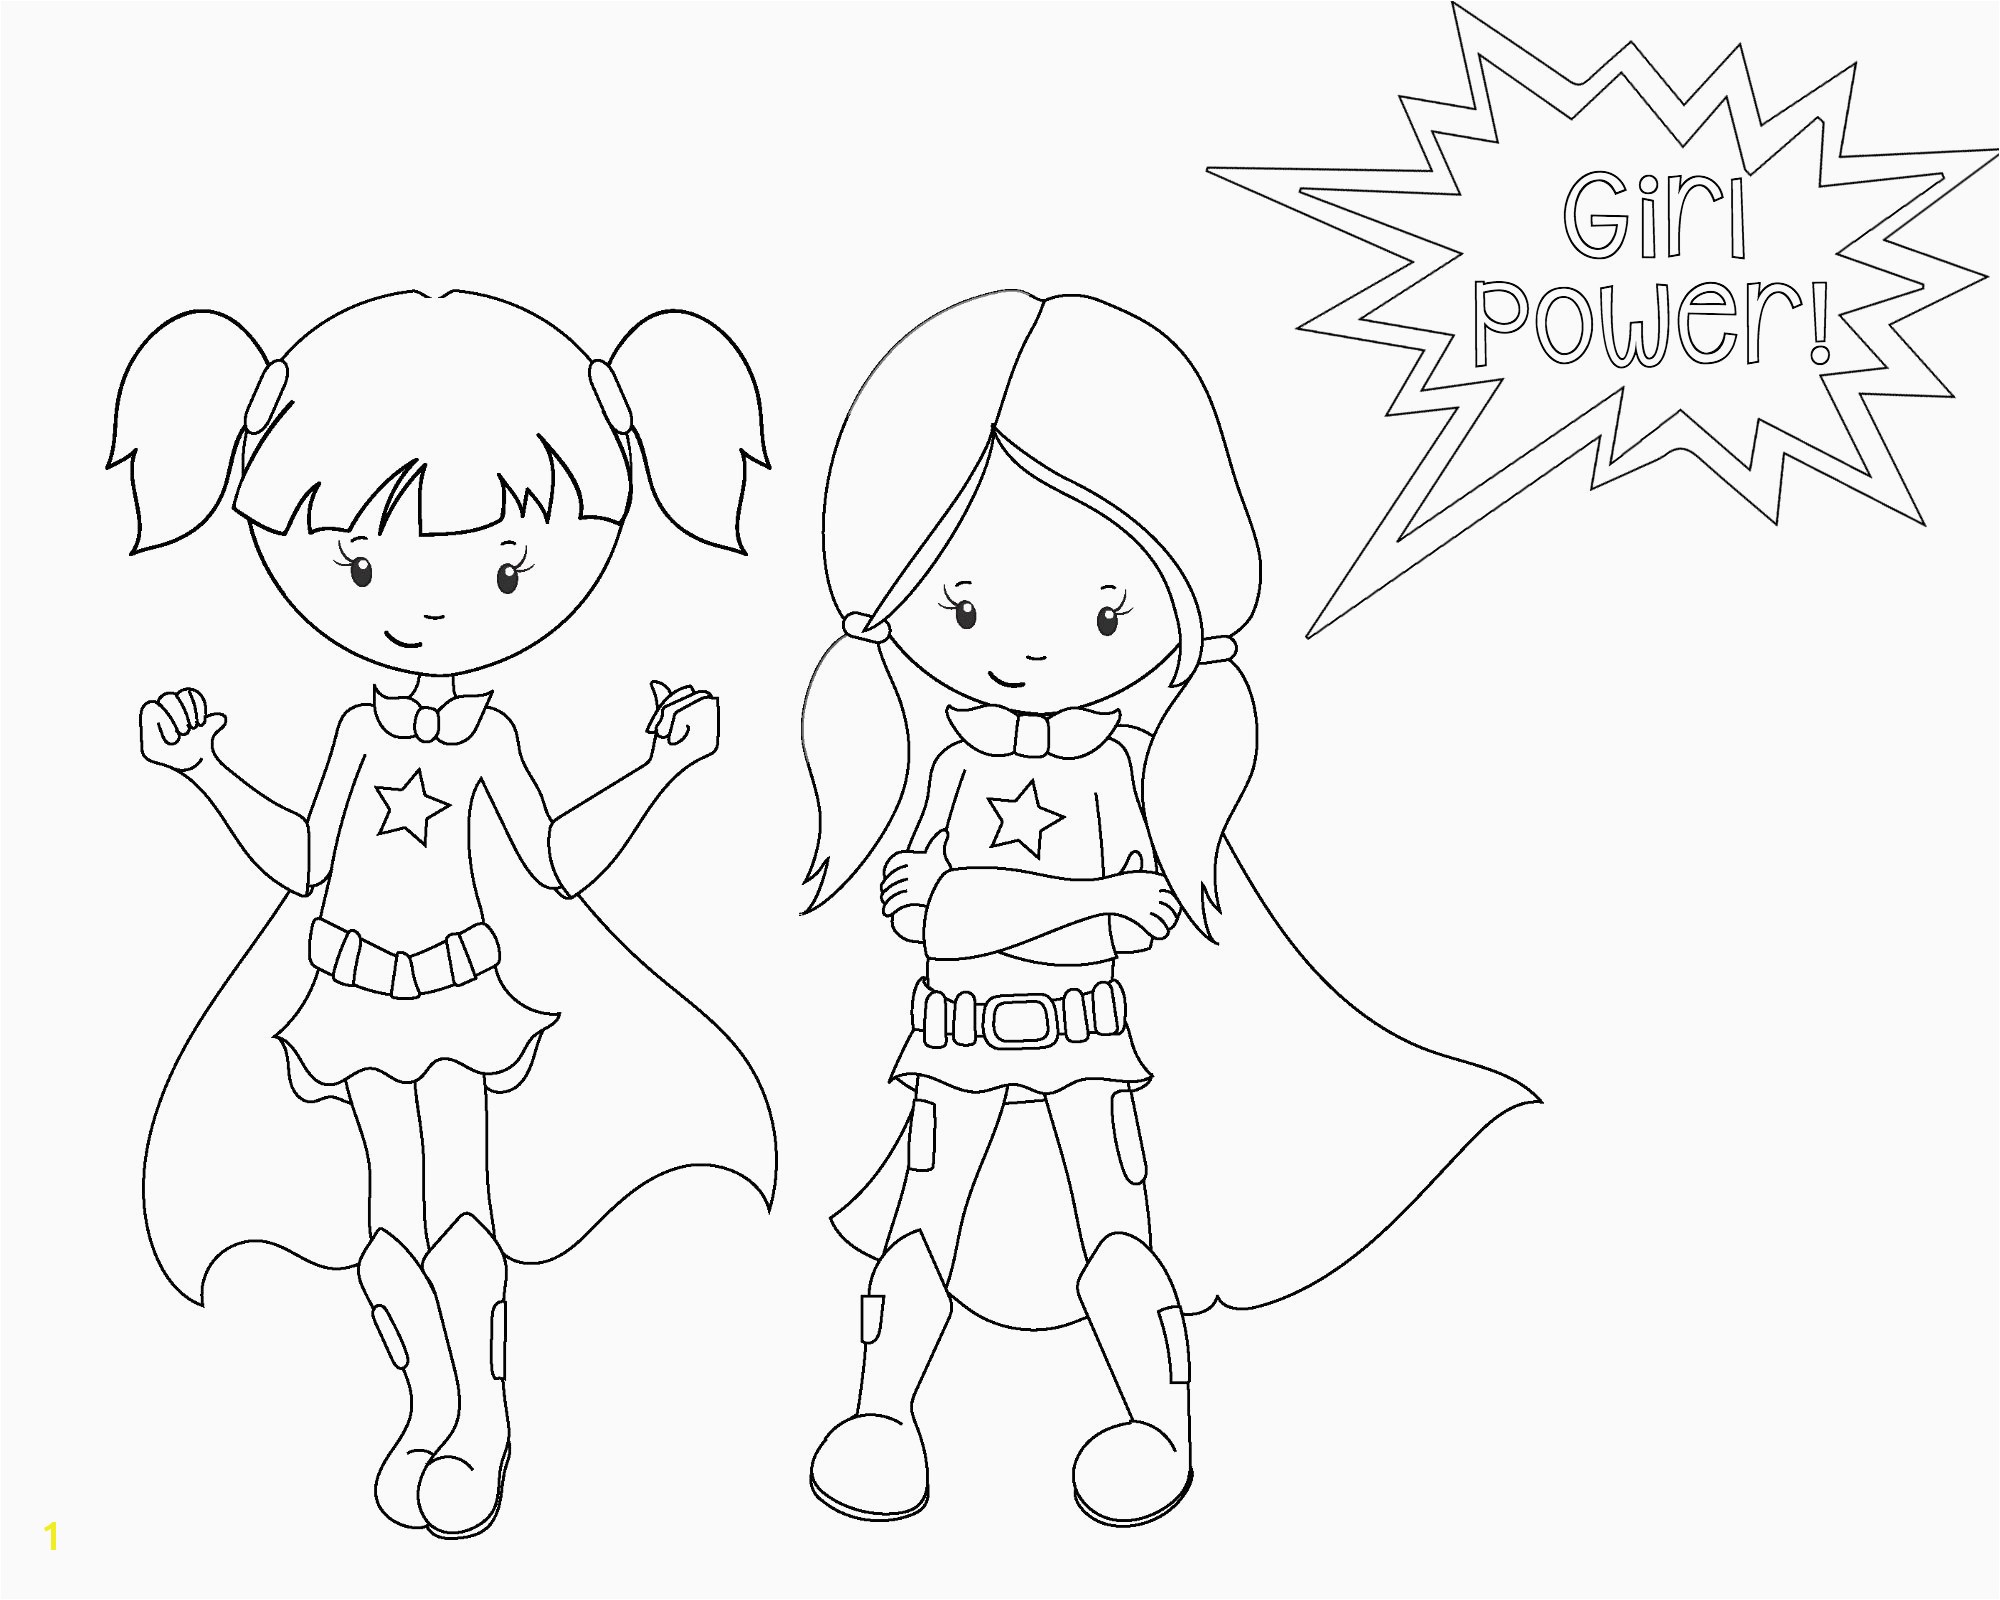 Tree Bark Coloring Pages New Free Superhero Coloring Pages Beautiful Kid Superhero Coloring Page graph